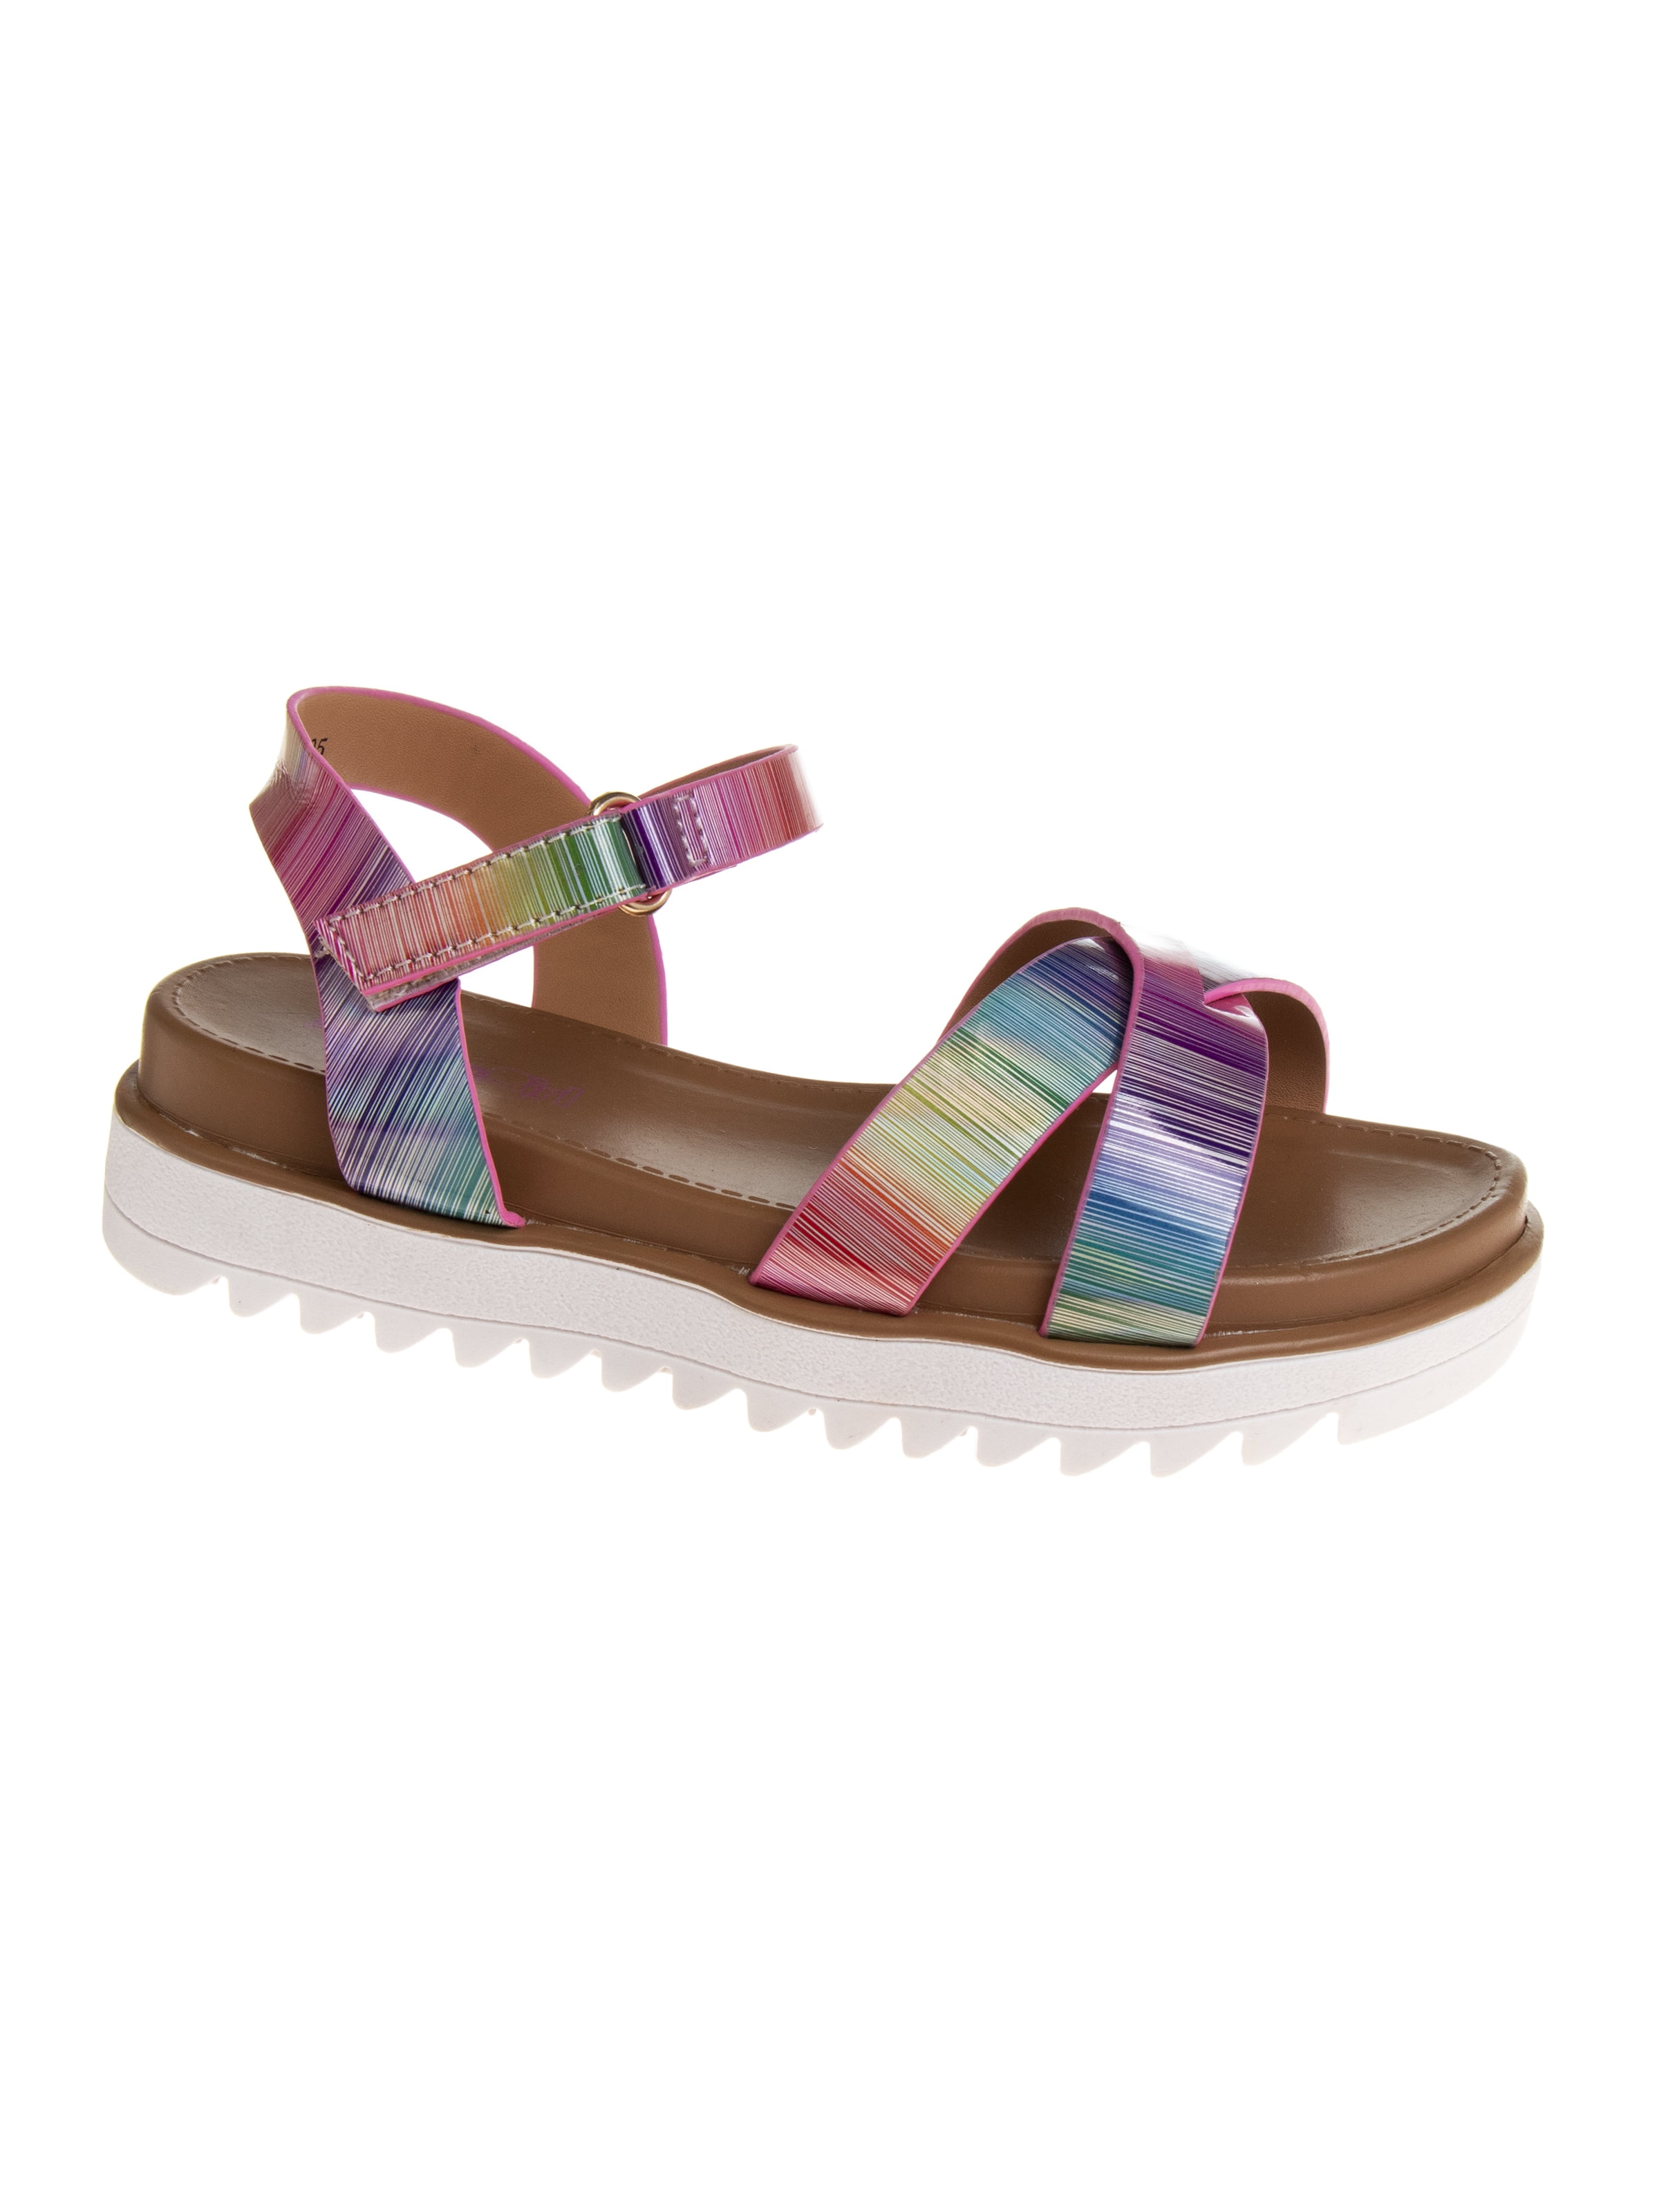 Kensie Girl Open Toe with Straps White Sole Sandal - Walmart.com